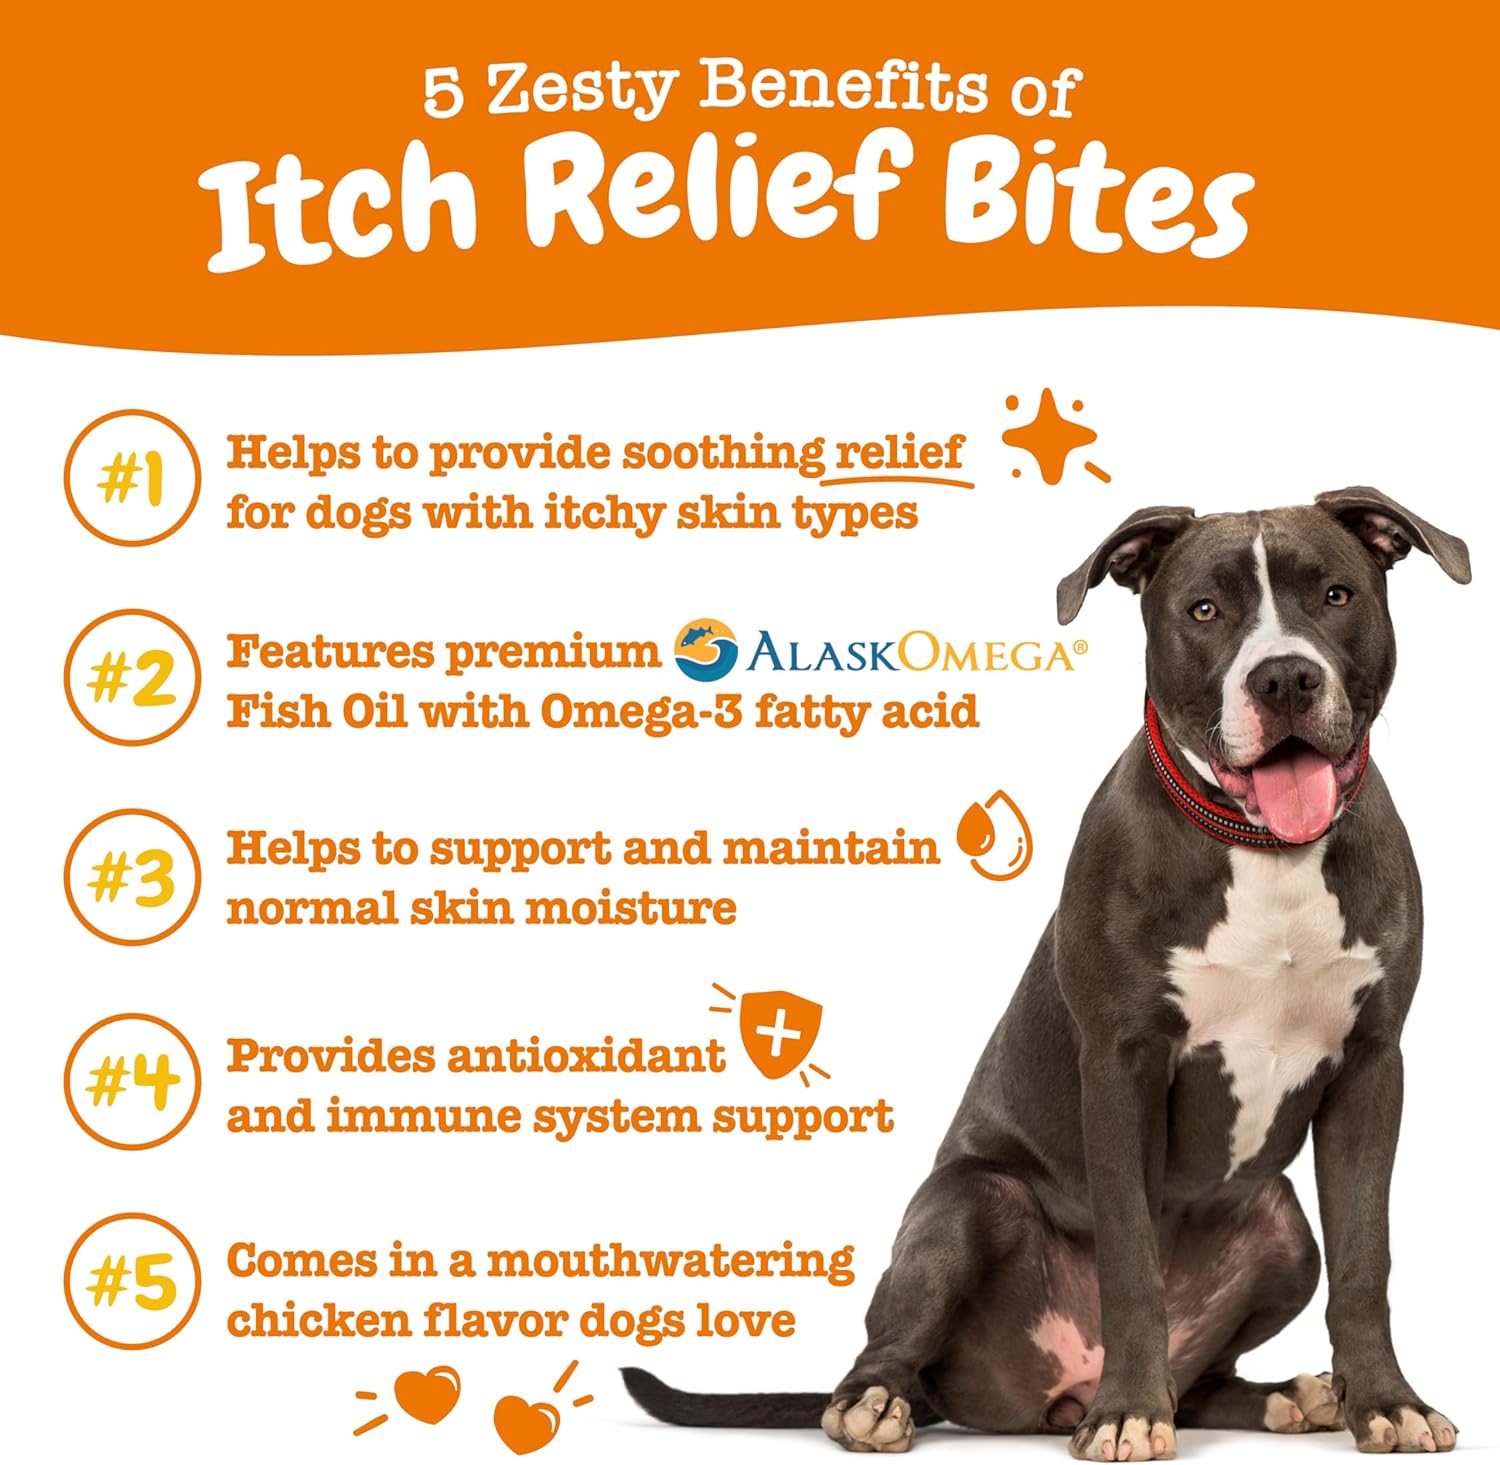 Itch Relief Bites for Dogs